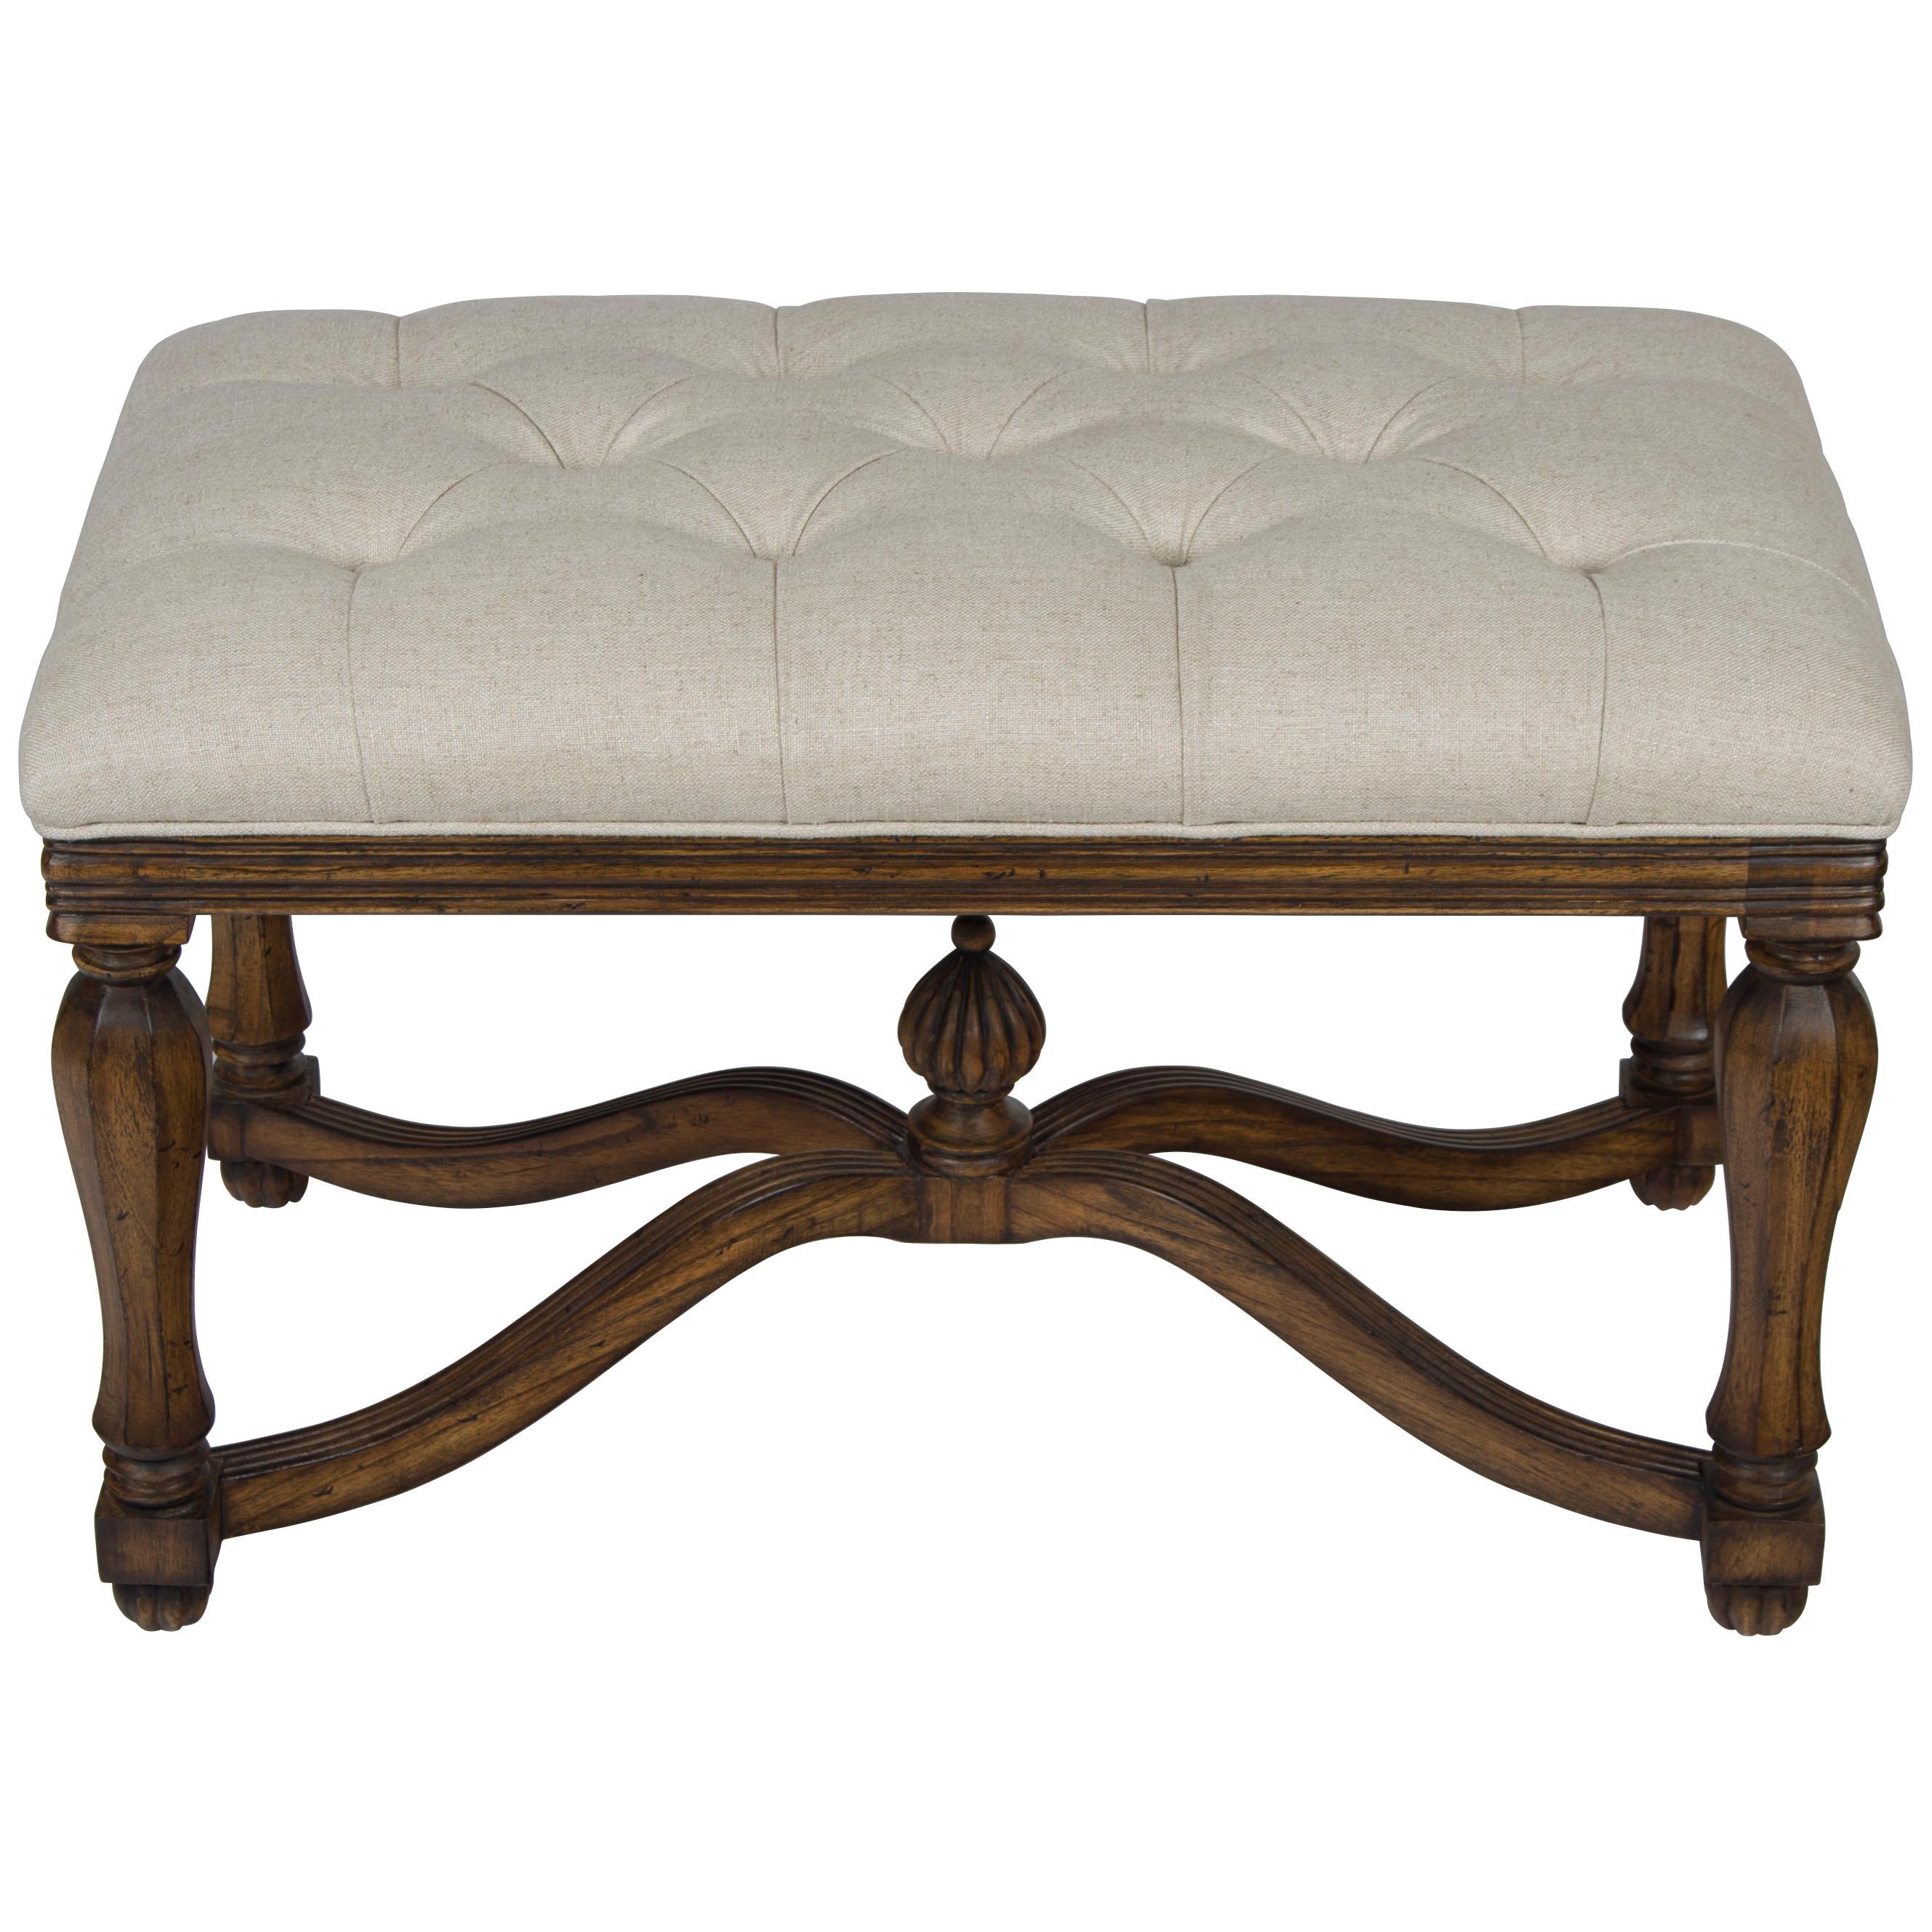 Henry IV Style Small Upholstered Bench Stool Ottoman